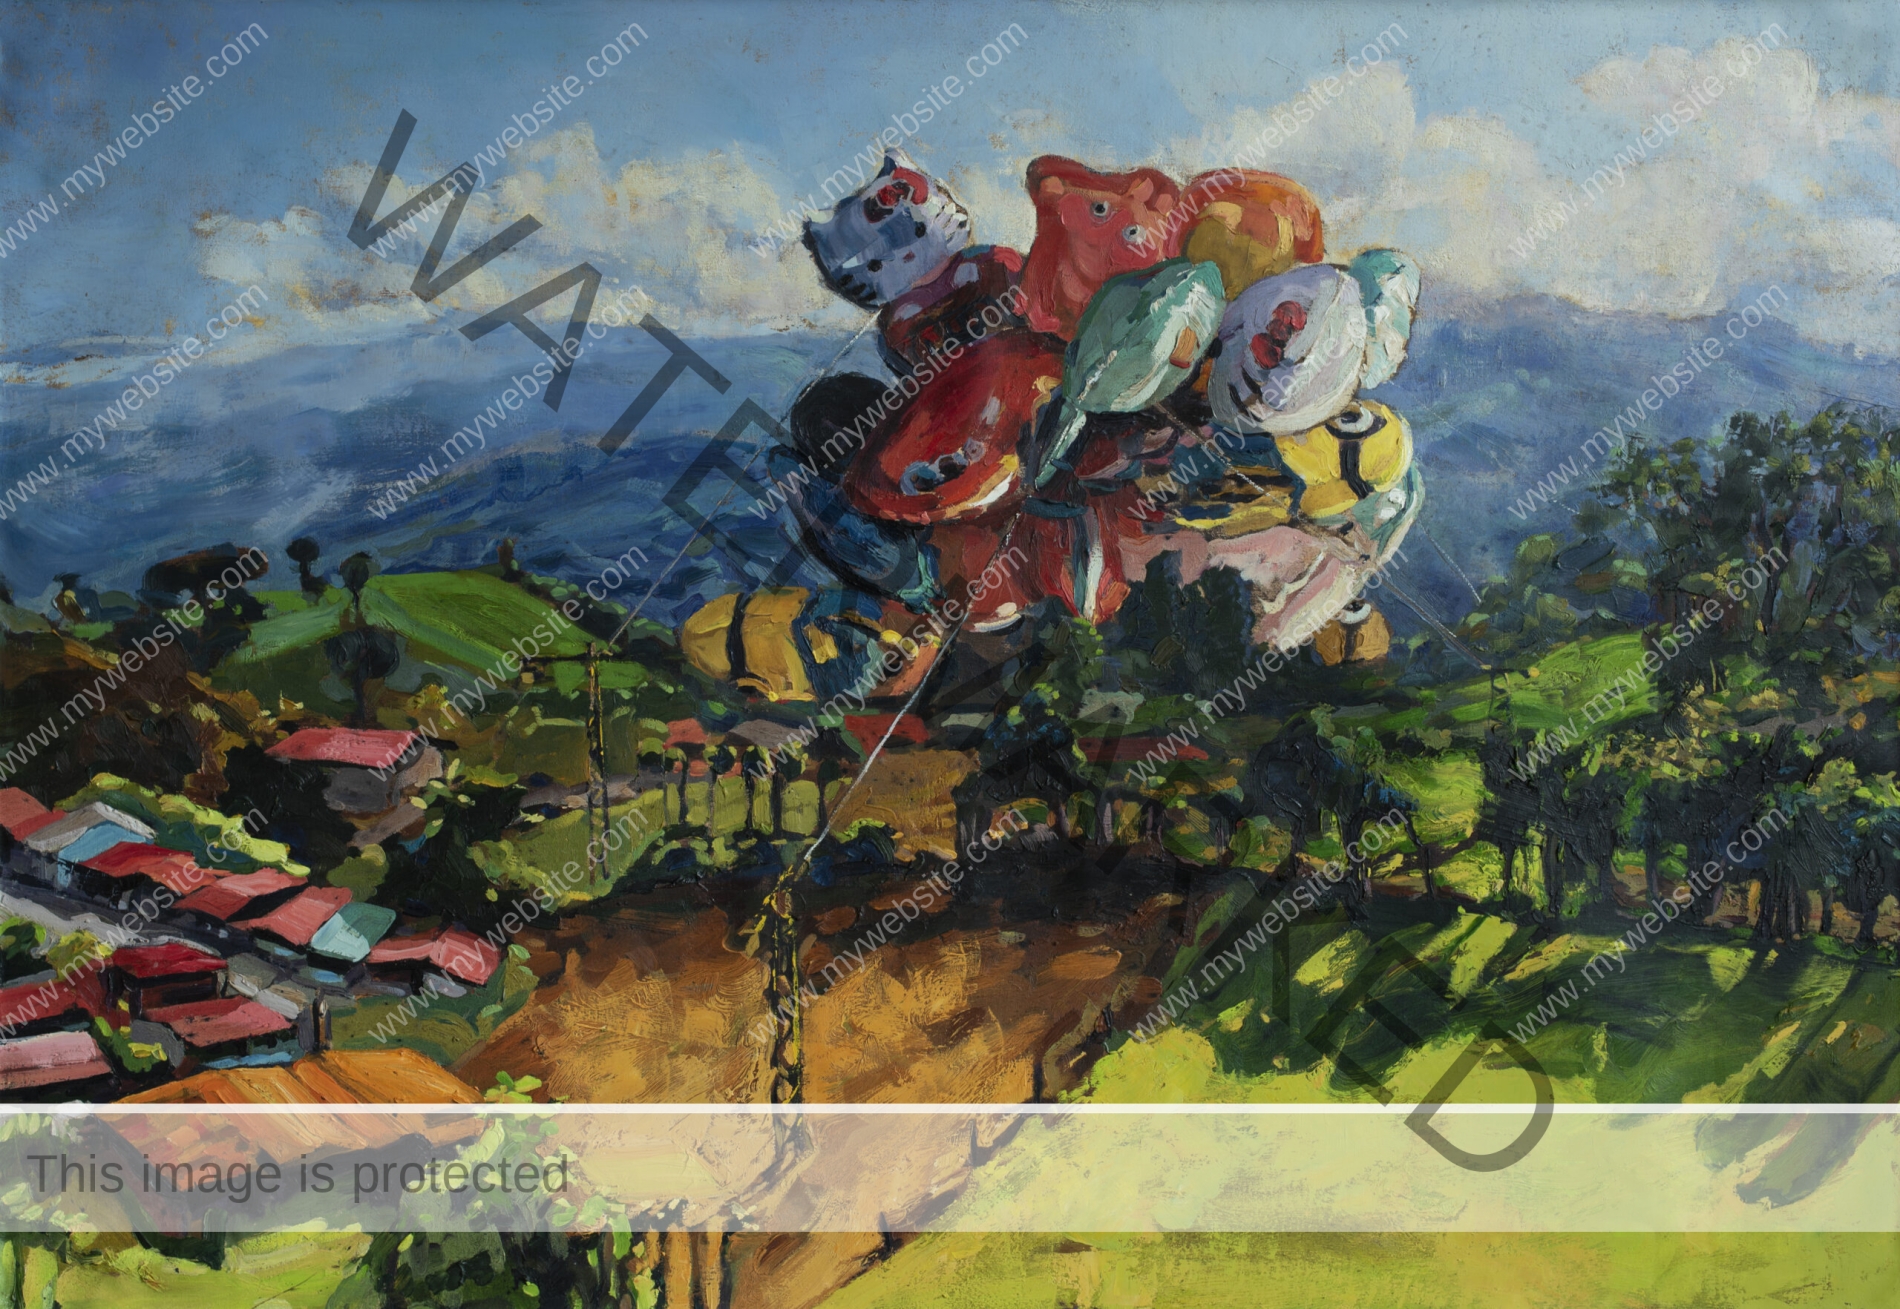 Oil painting of fields, mountains and sky with a large bunch of balloons of cartoon characters like hello kitty and Minions floating overhead by Adrián Arguedas. Cervantes